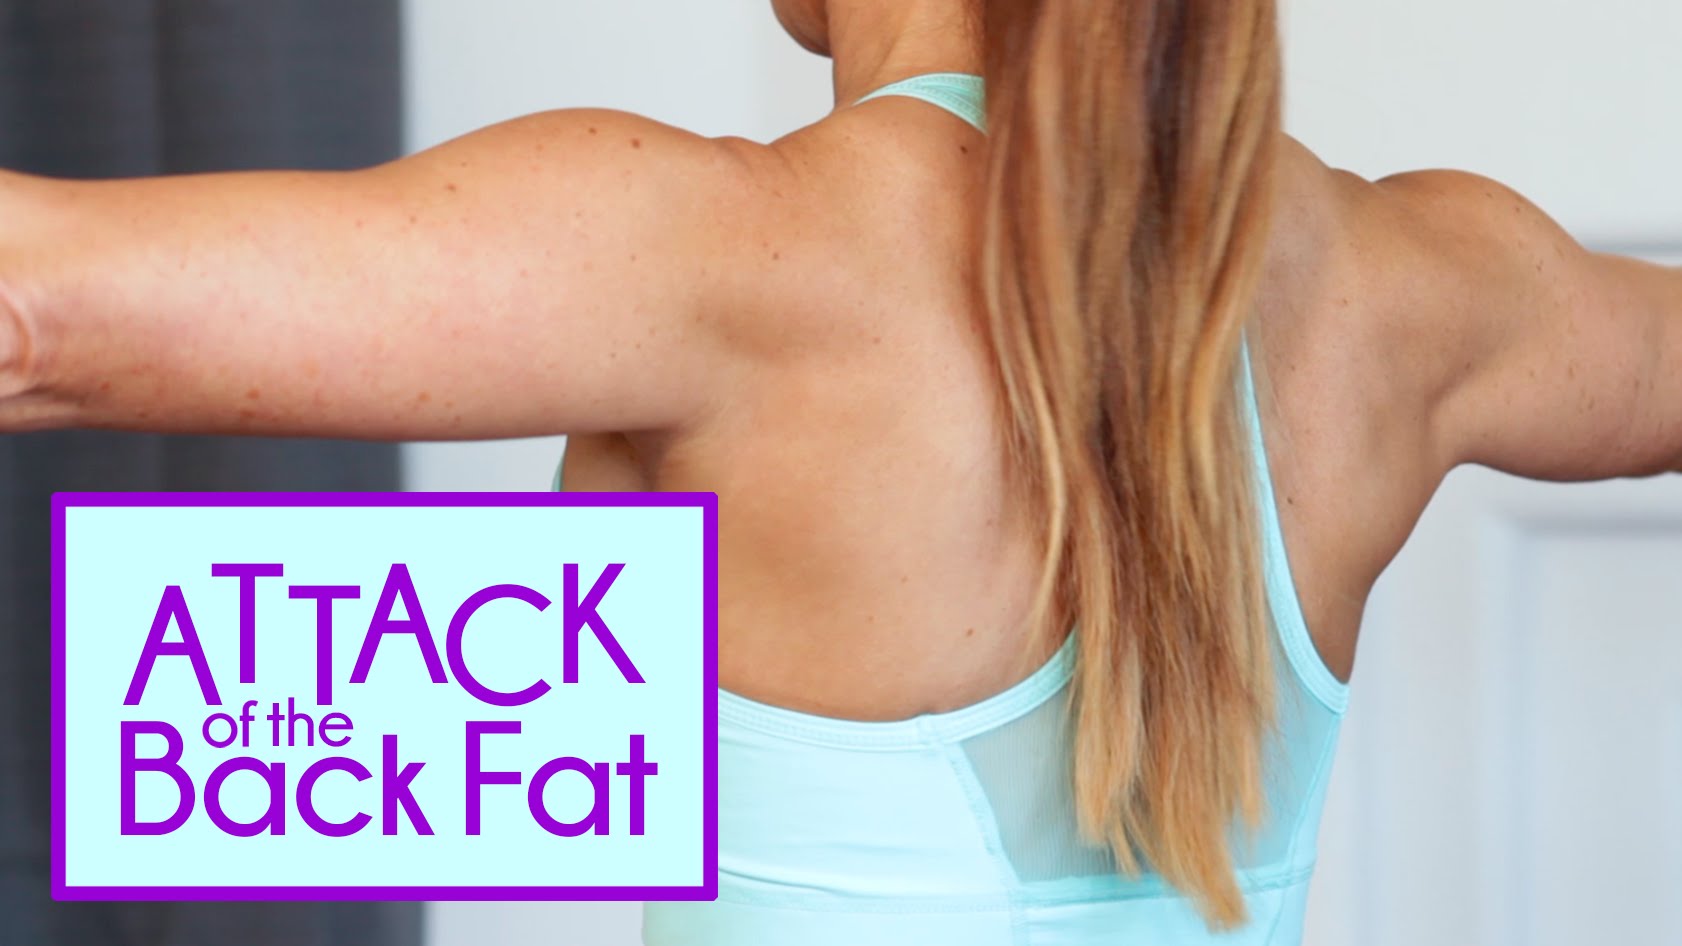 Exercises to Get Rid of Back Fat and Bra Overhang